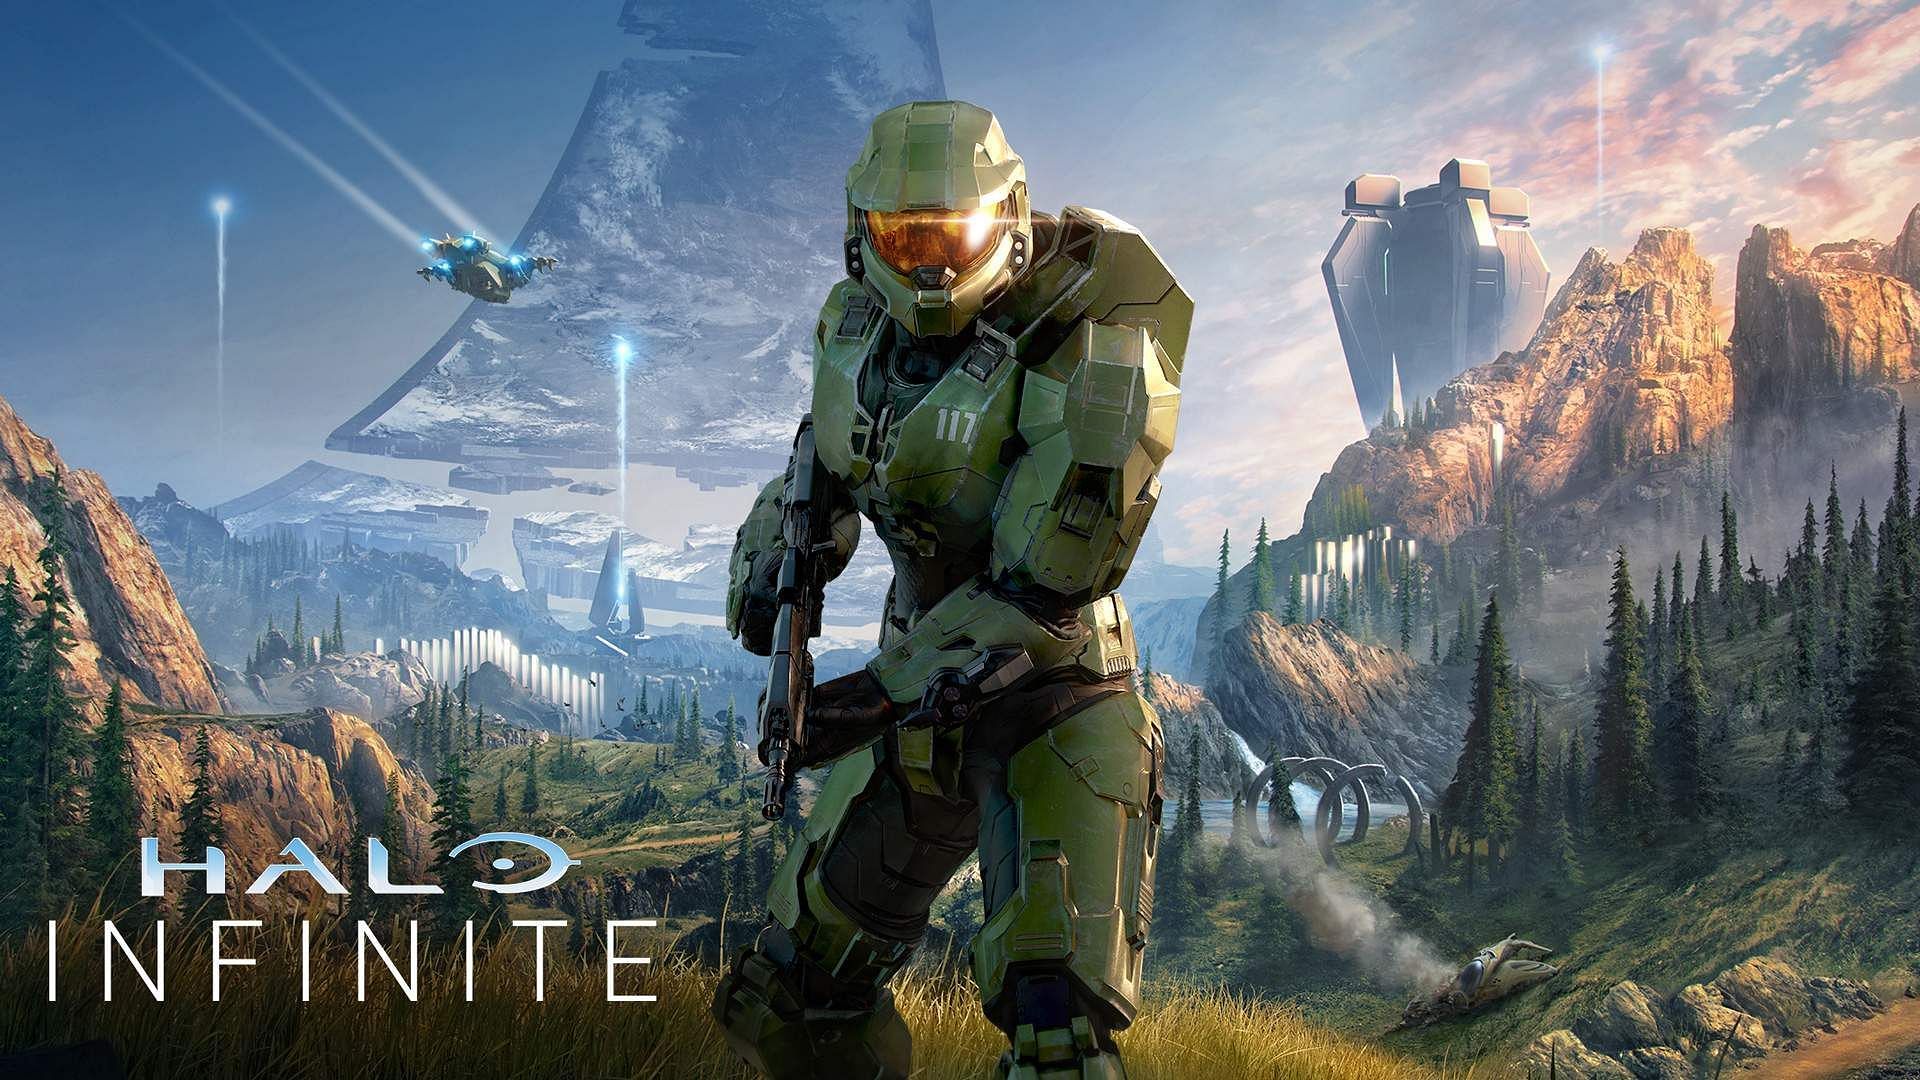 A promotional image for Halo Infinite (Image via 343 Industries)